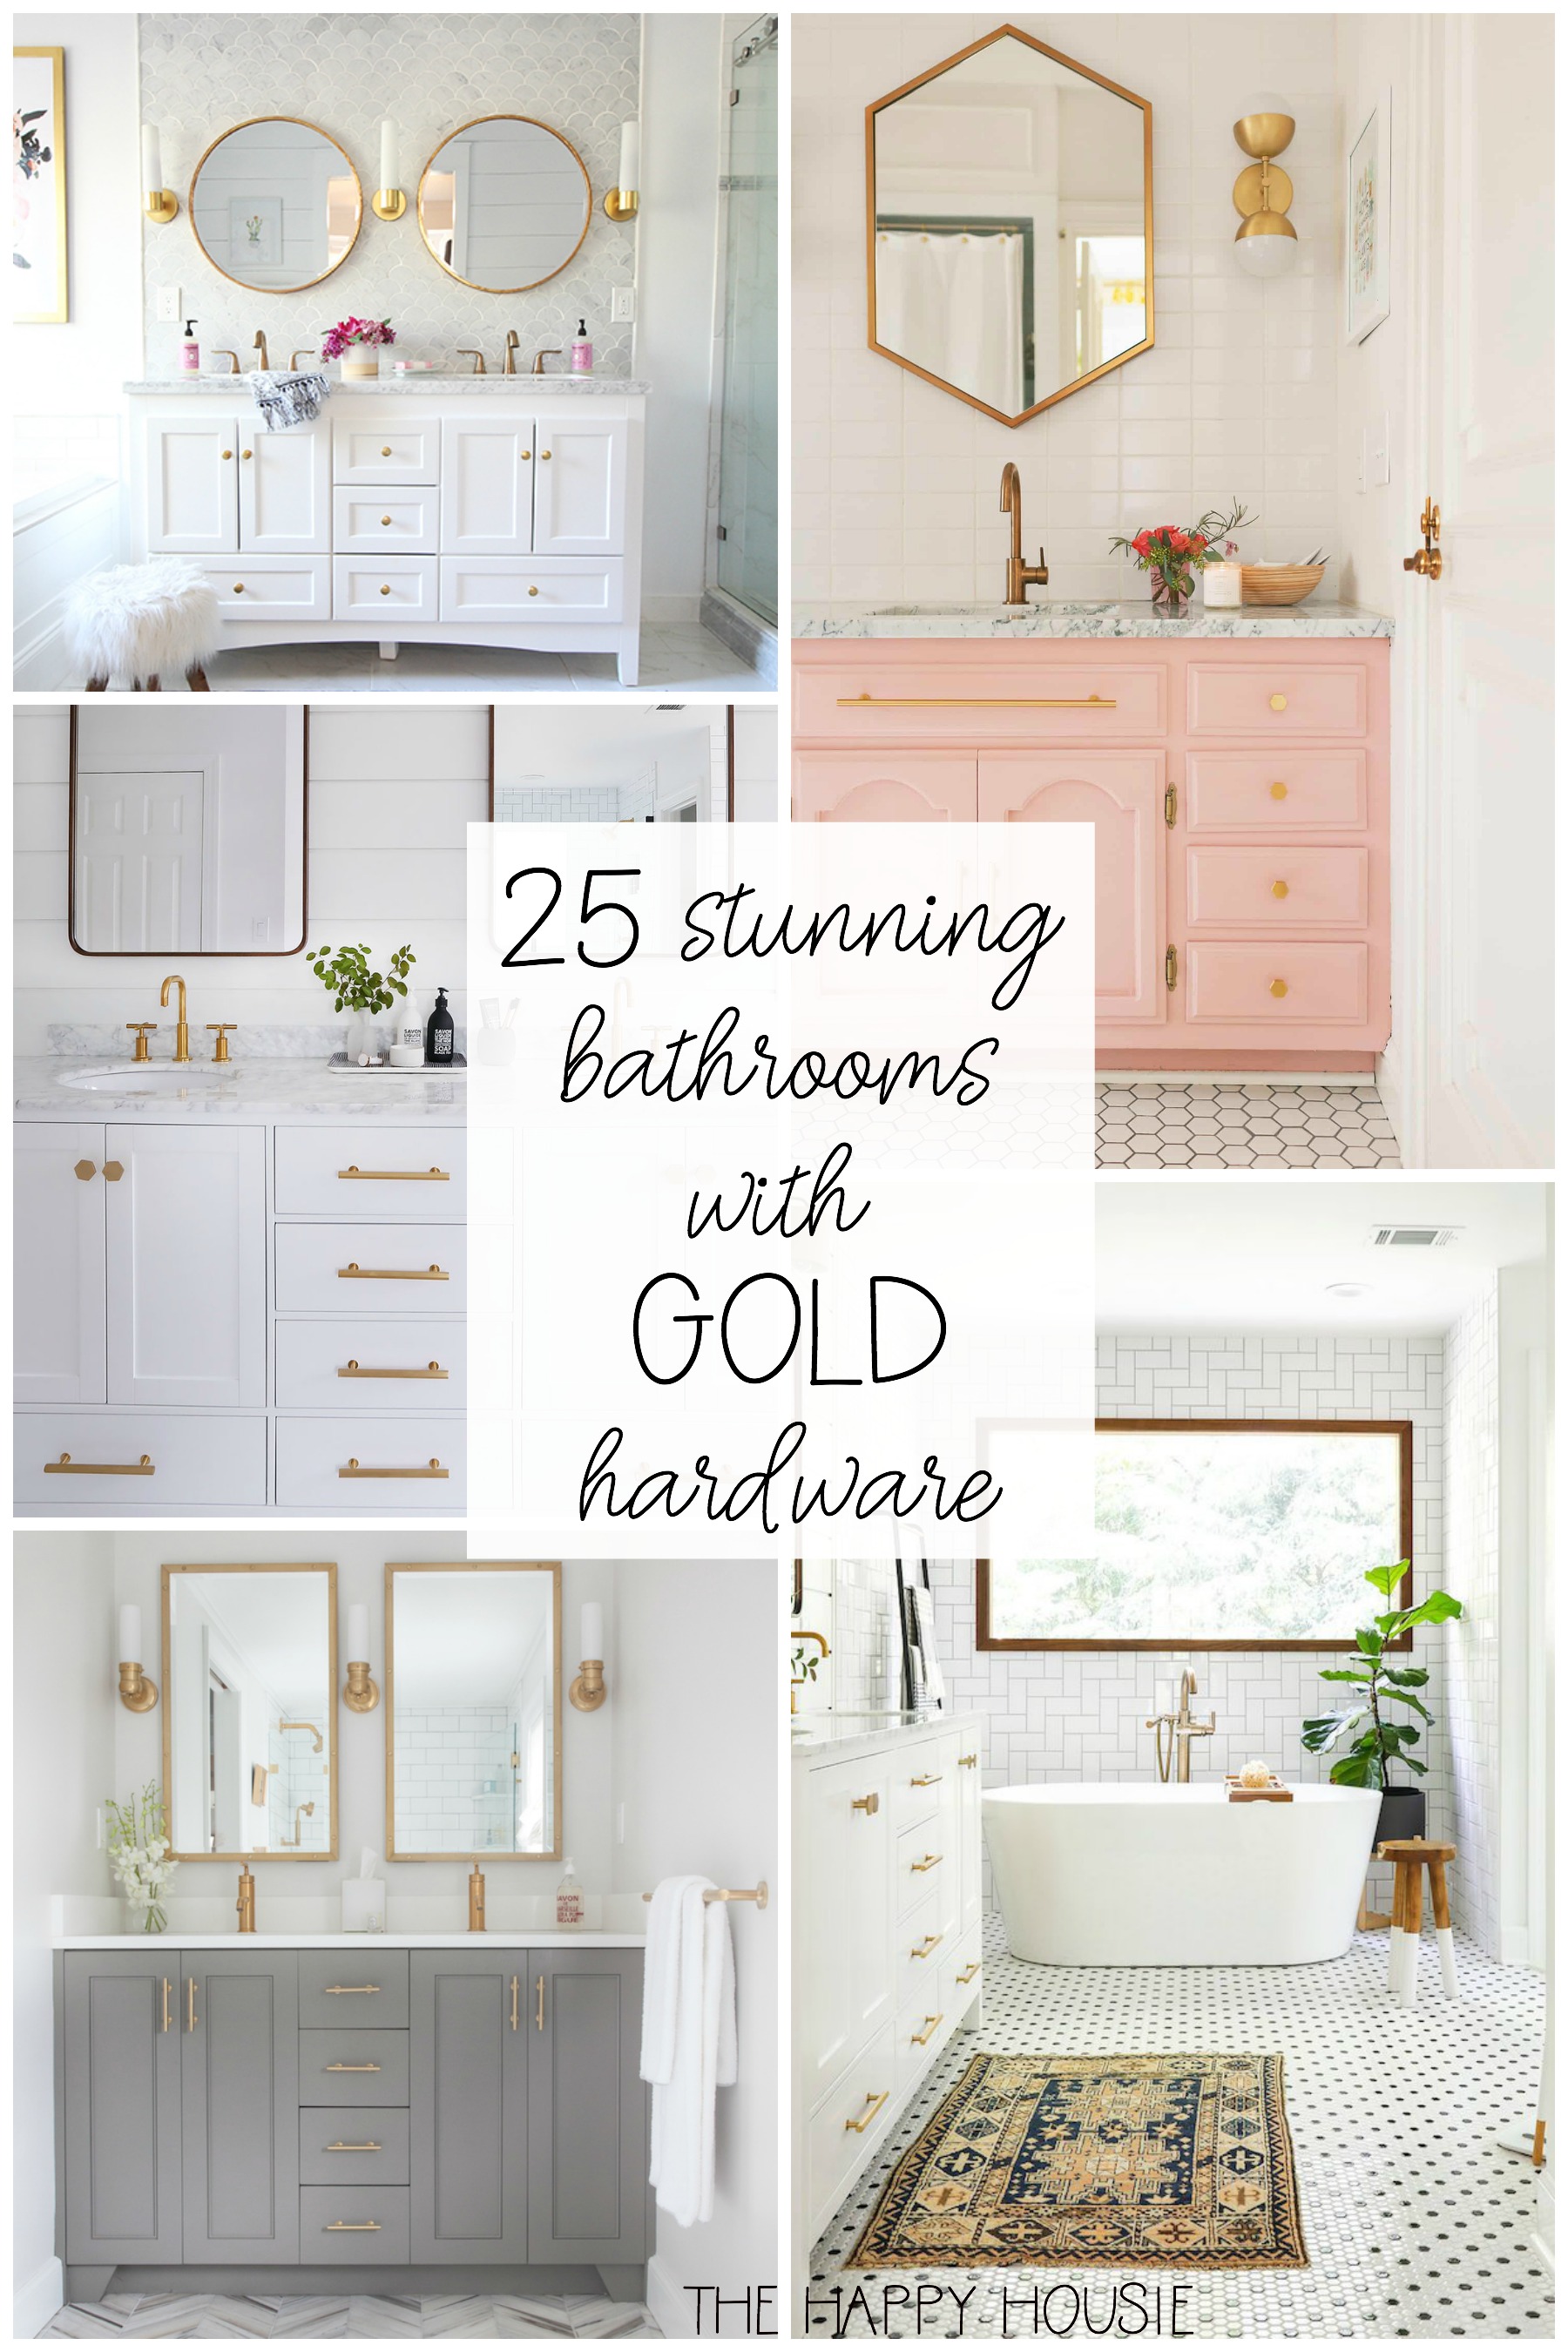 25 Stunning Bathrooms With Gold Hardware poster.